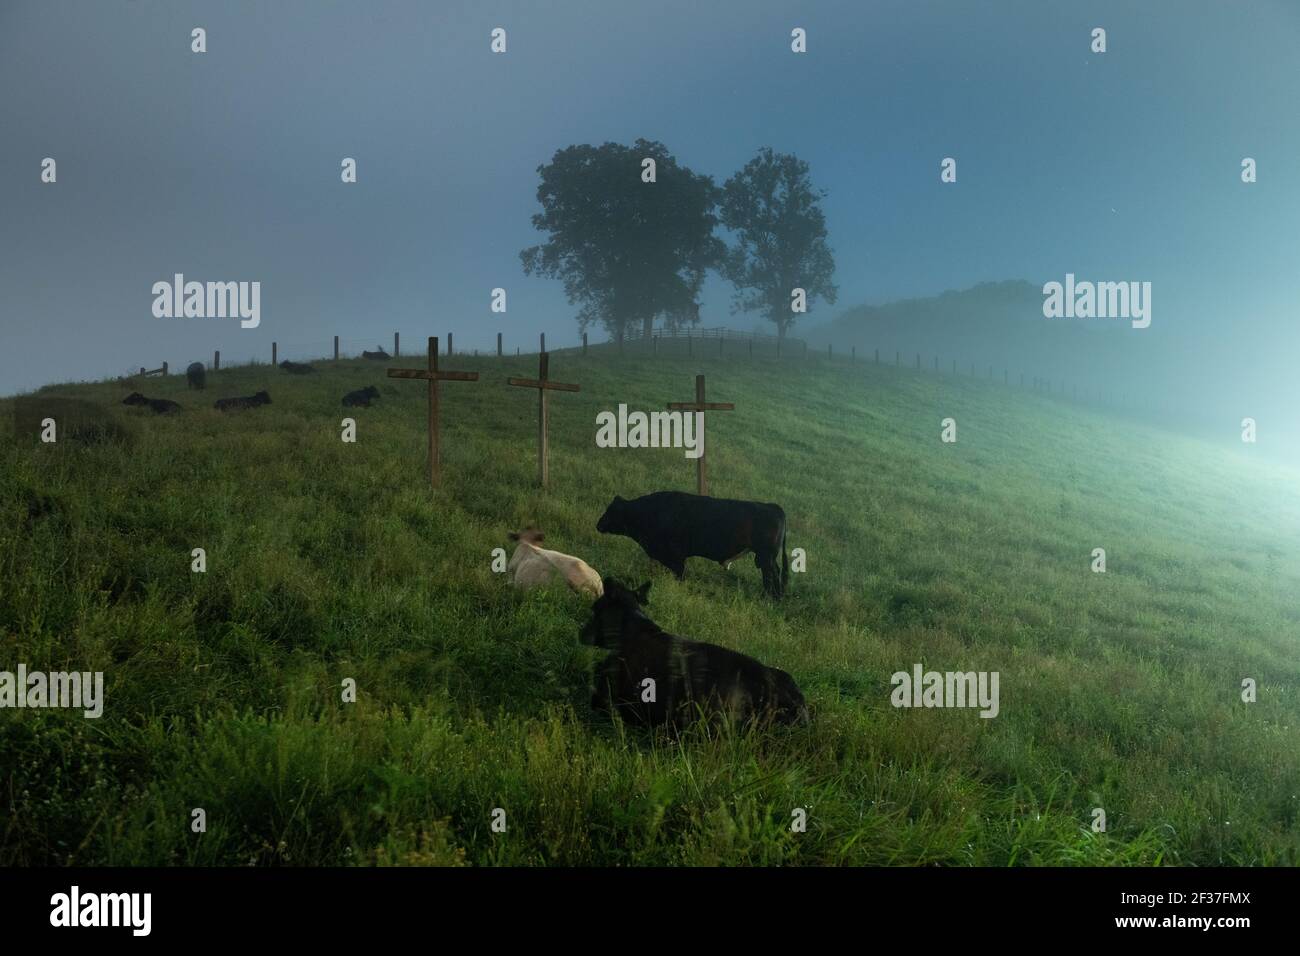 Cattle in a Foggy Field Amongst Crucifxes Stock Photo